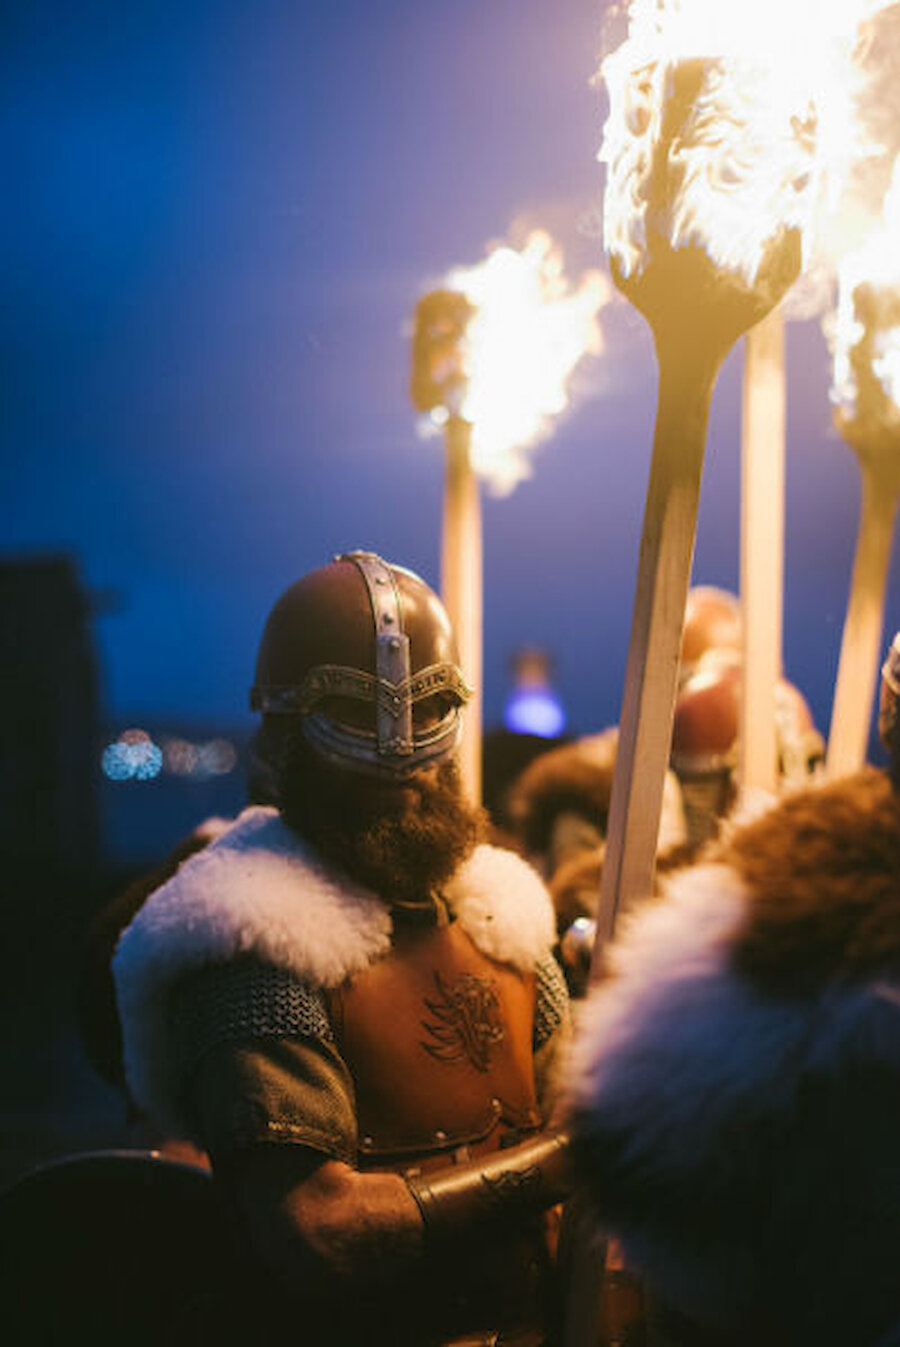 The costumes, featuring sheepskins, leather and chain mail, were very impressive (Courtesy Alex Mazurov)